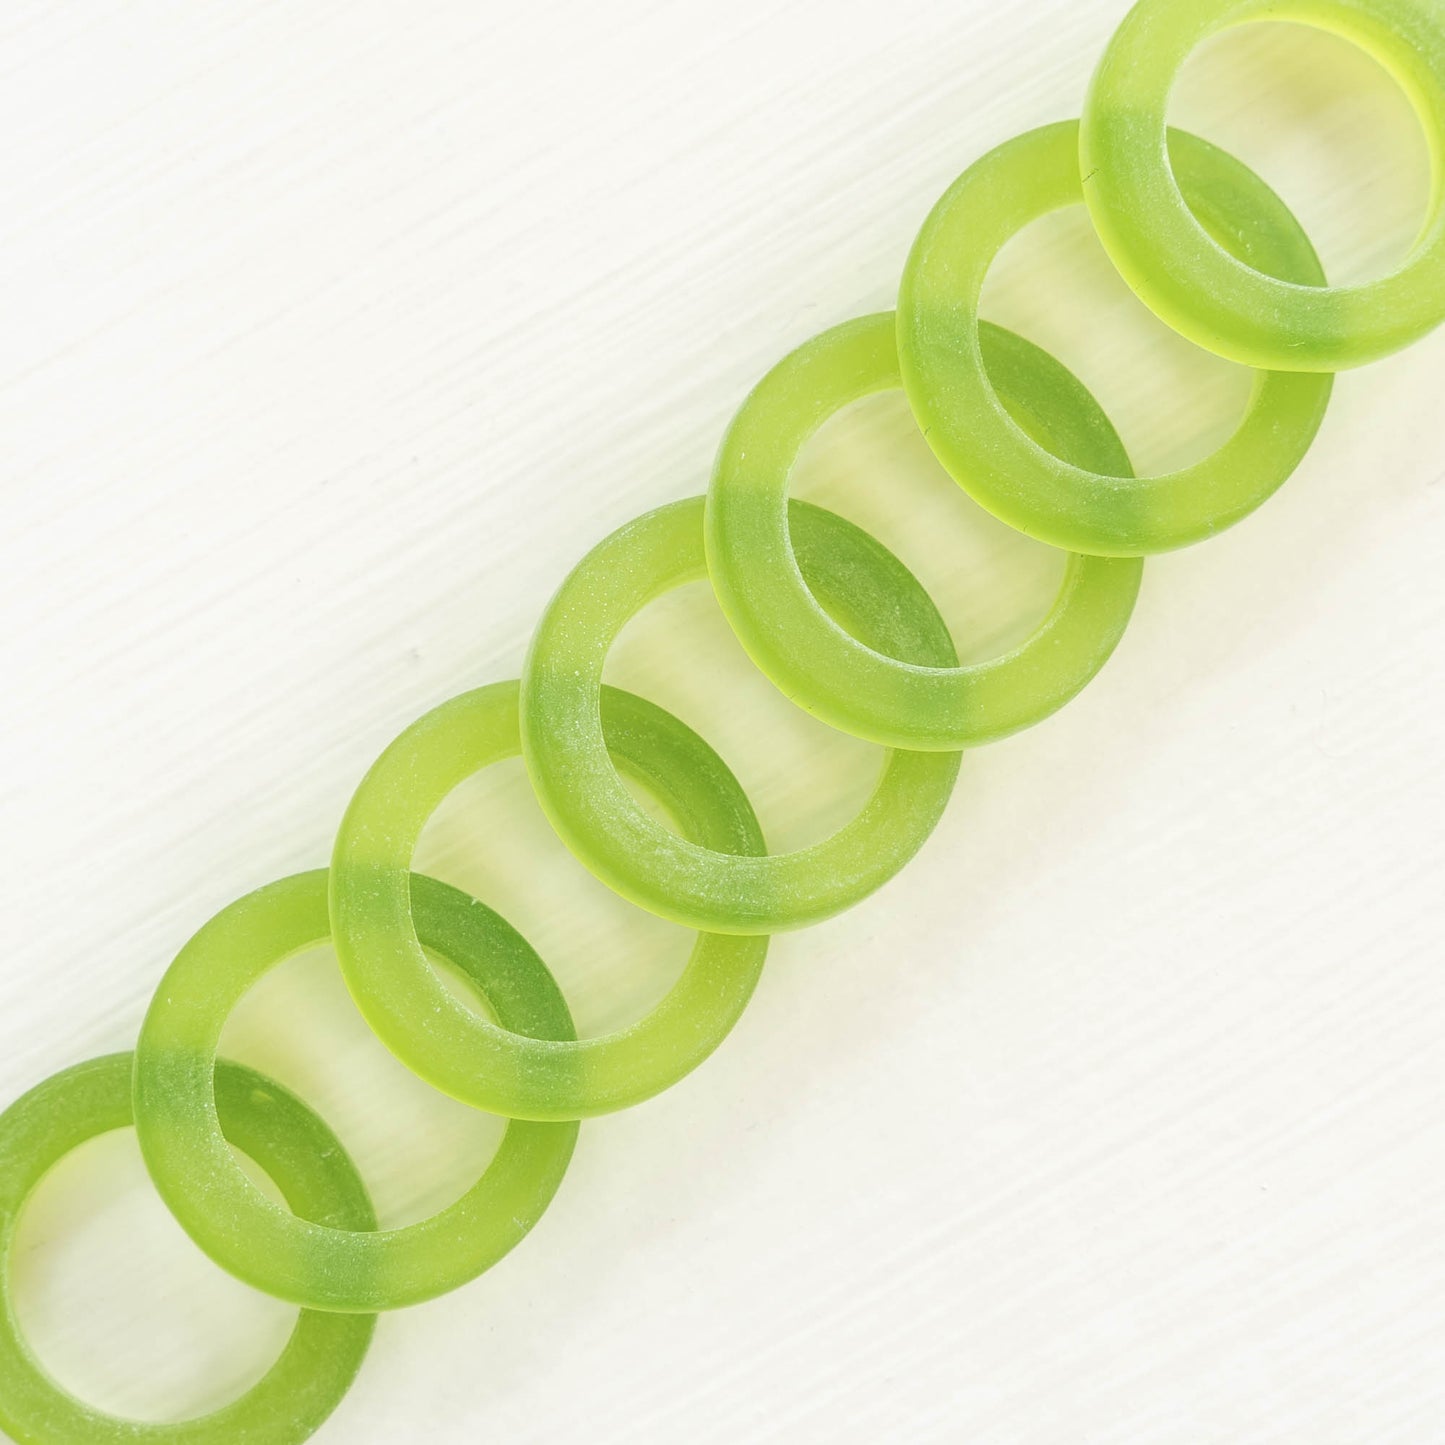 Load image into Gallery viewer, 23mm Frosted Glass Rings - Lime Green - Choose Amount
